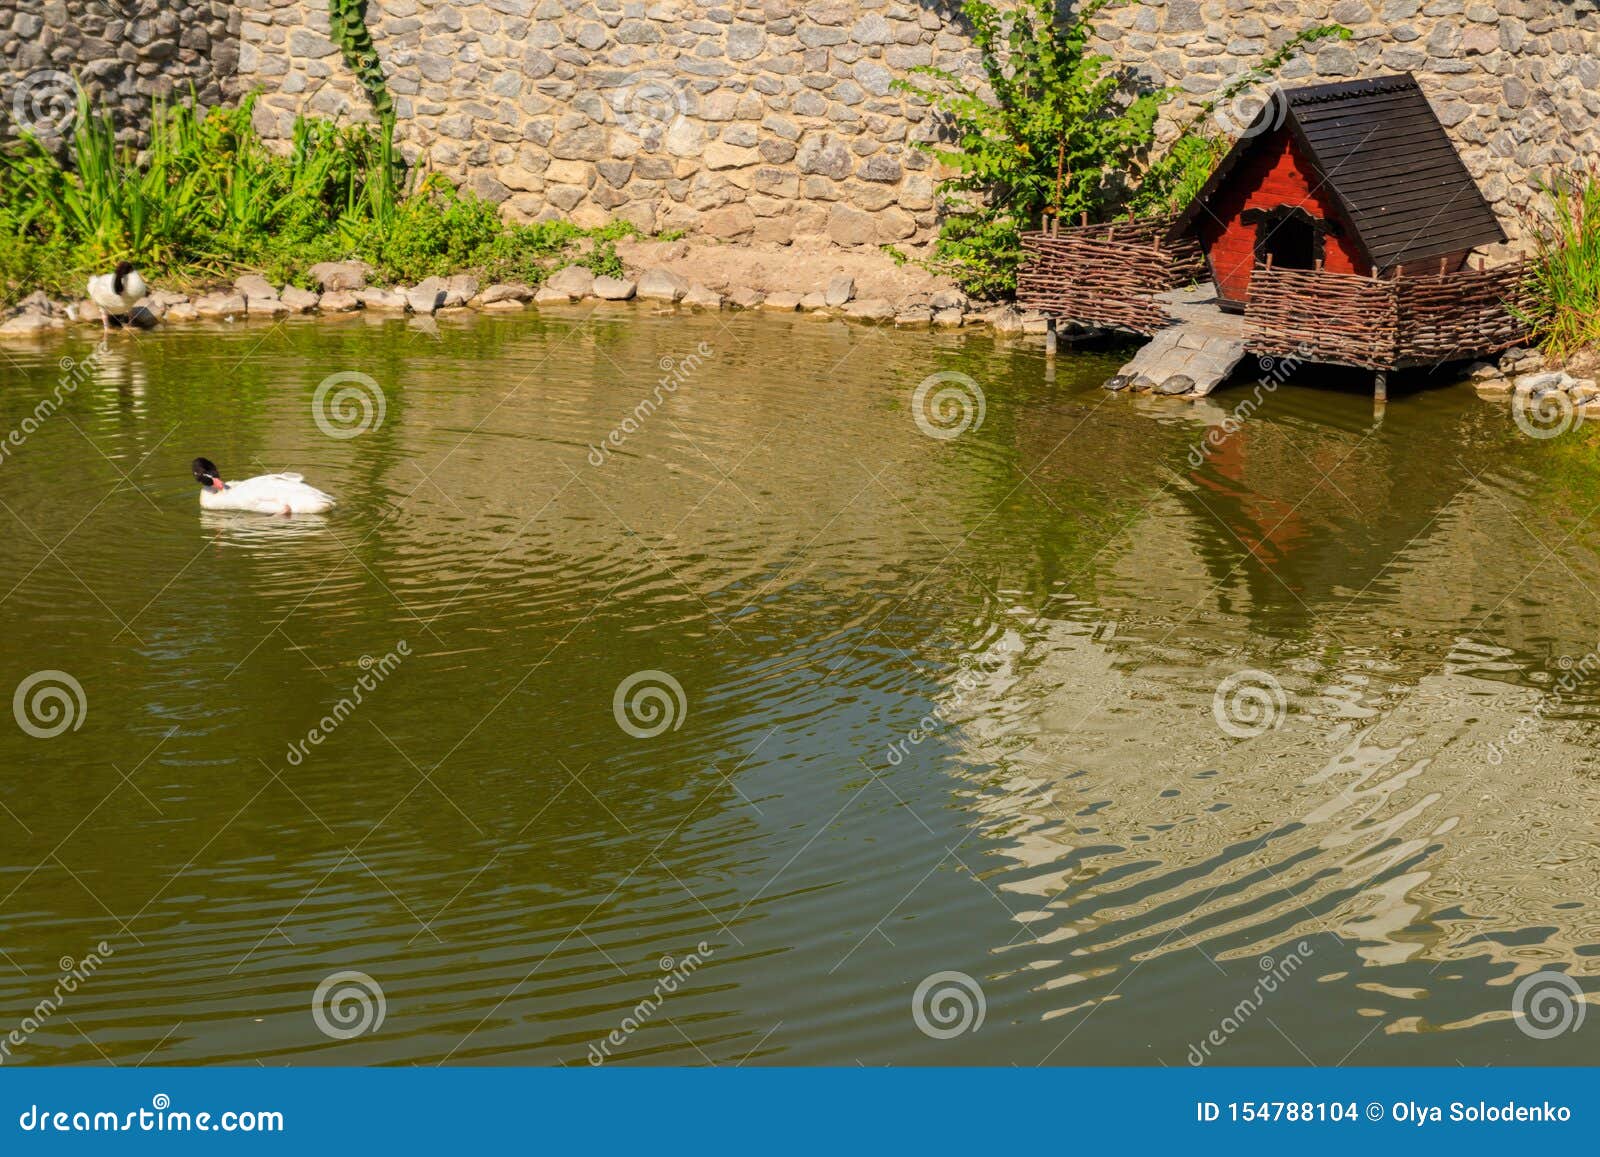 Wooden house for water birds and turtles on a lake in a city park